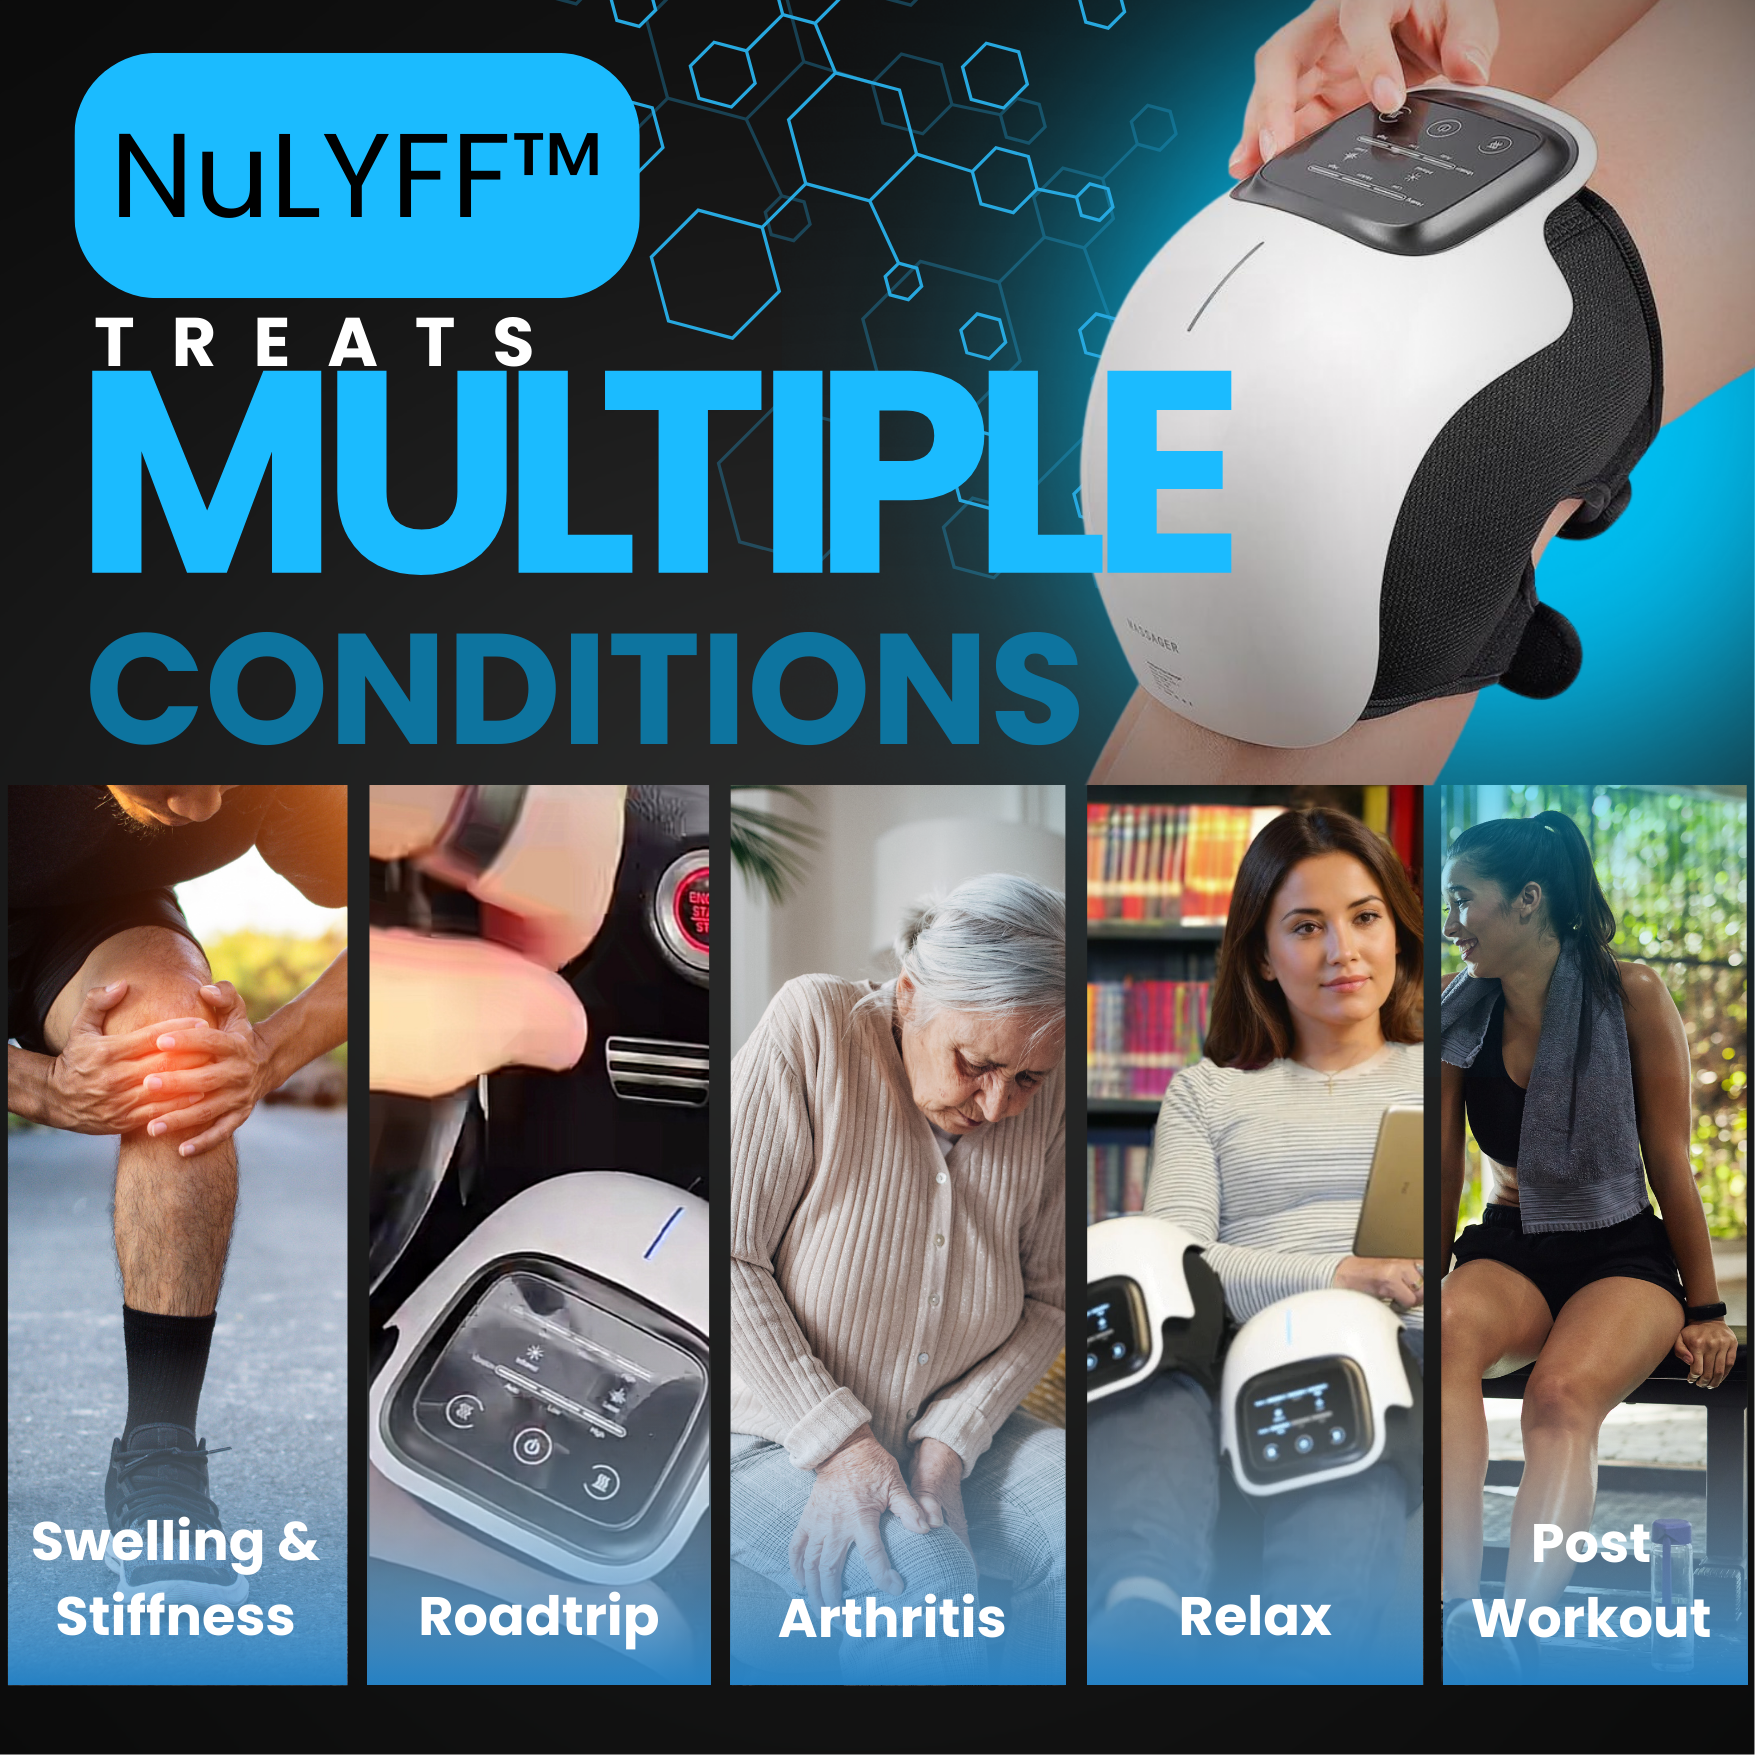 Image of NuLYFF™ Knee Massager card indicating unit is great for Swelling & stiffness, relief for knees during a road trip, Arthritis, Relaxation, and post workout therapy. Your knee will feel the relief from Osteoarthritis